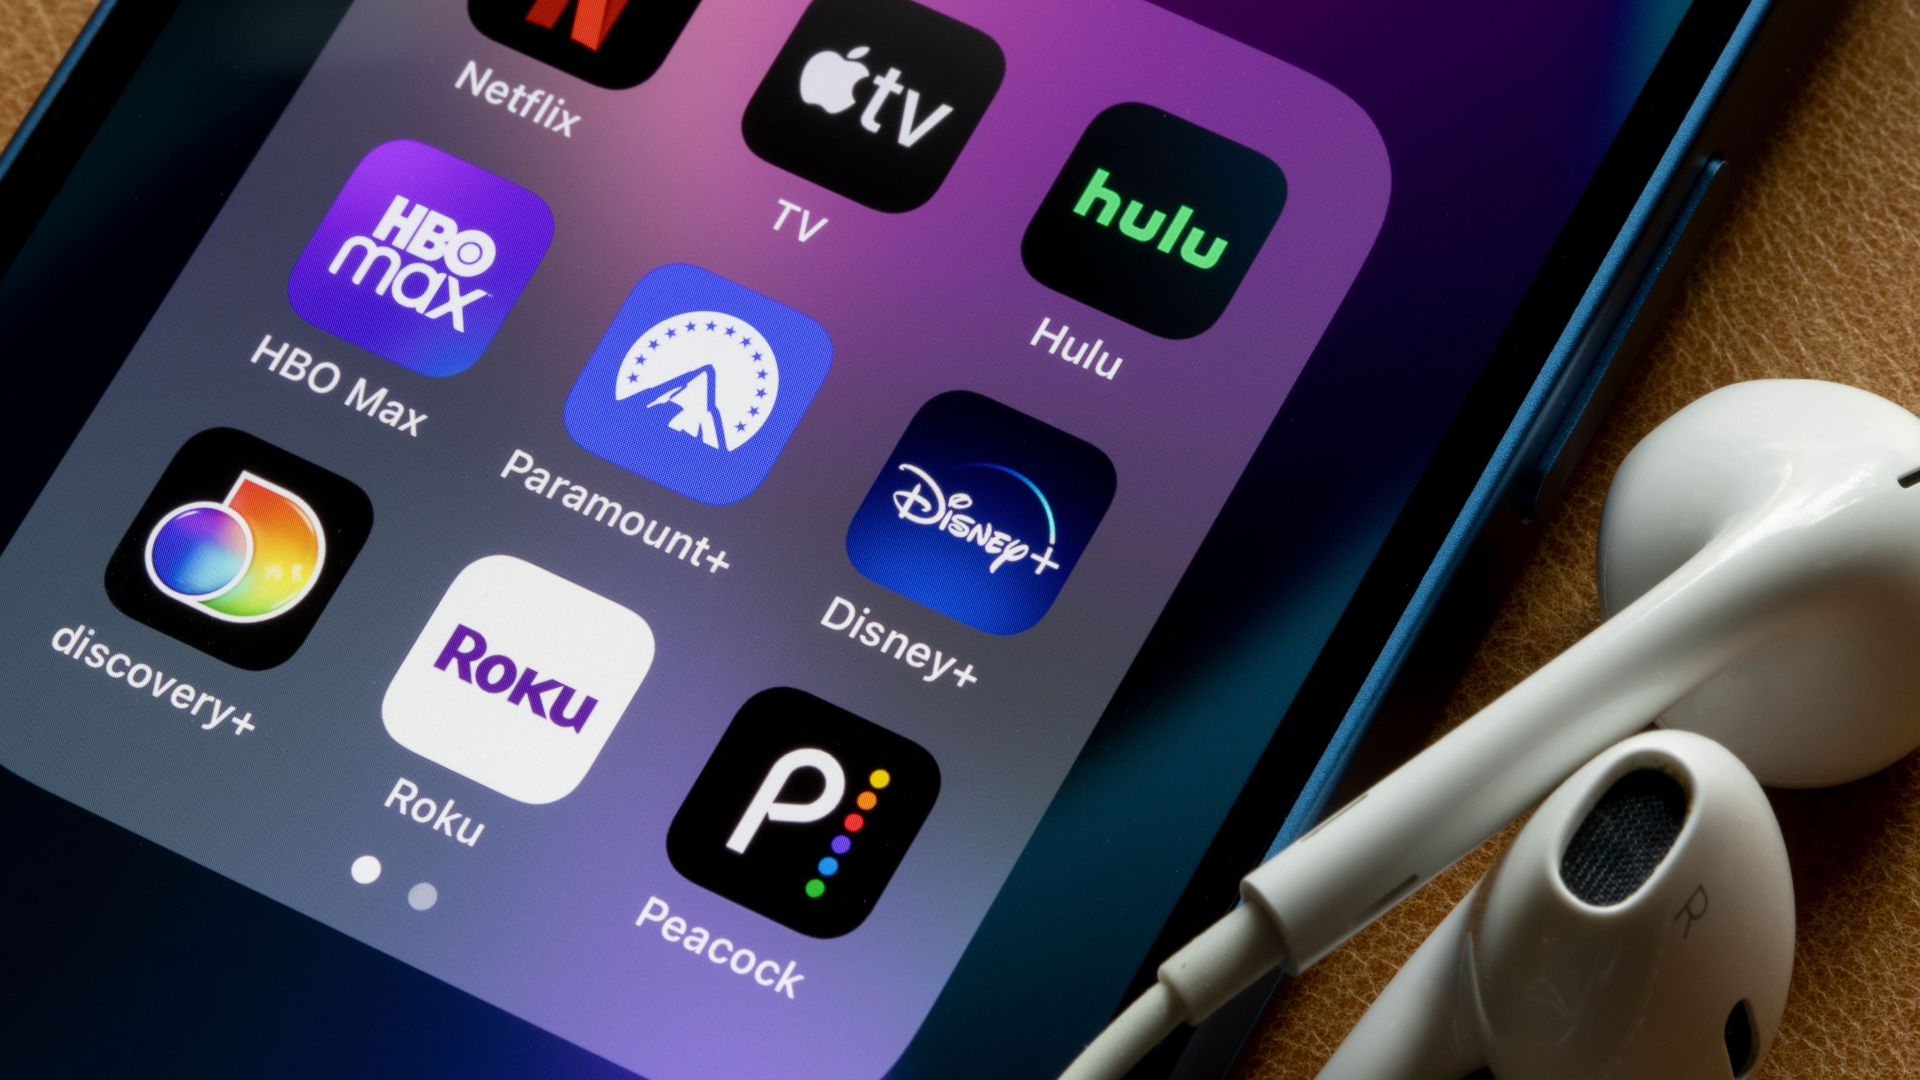 Assorted streaming apps are seen on an iPhone, including Netflix, Apple TV, Hulu, HBO Max, Paramount Plus, Disney Plus, Discovery Plus, Roku, and Peacock.